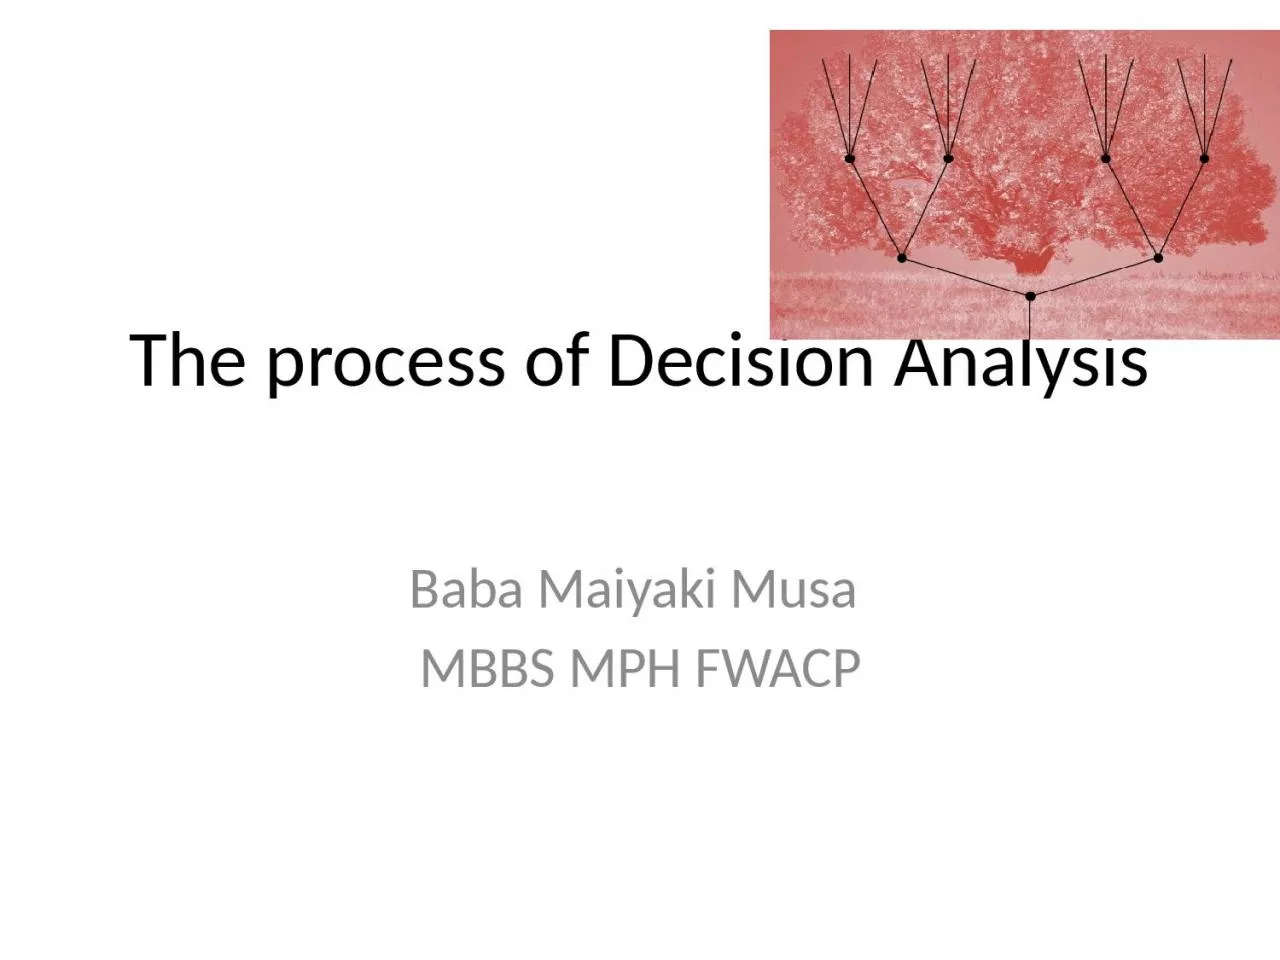 The process of Decision Analysis